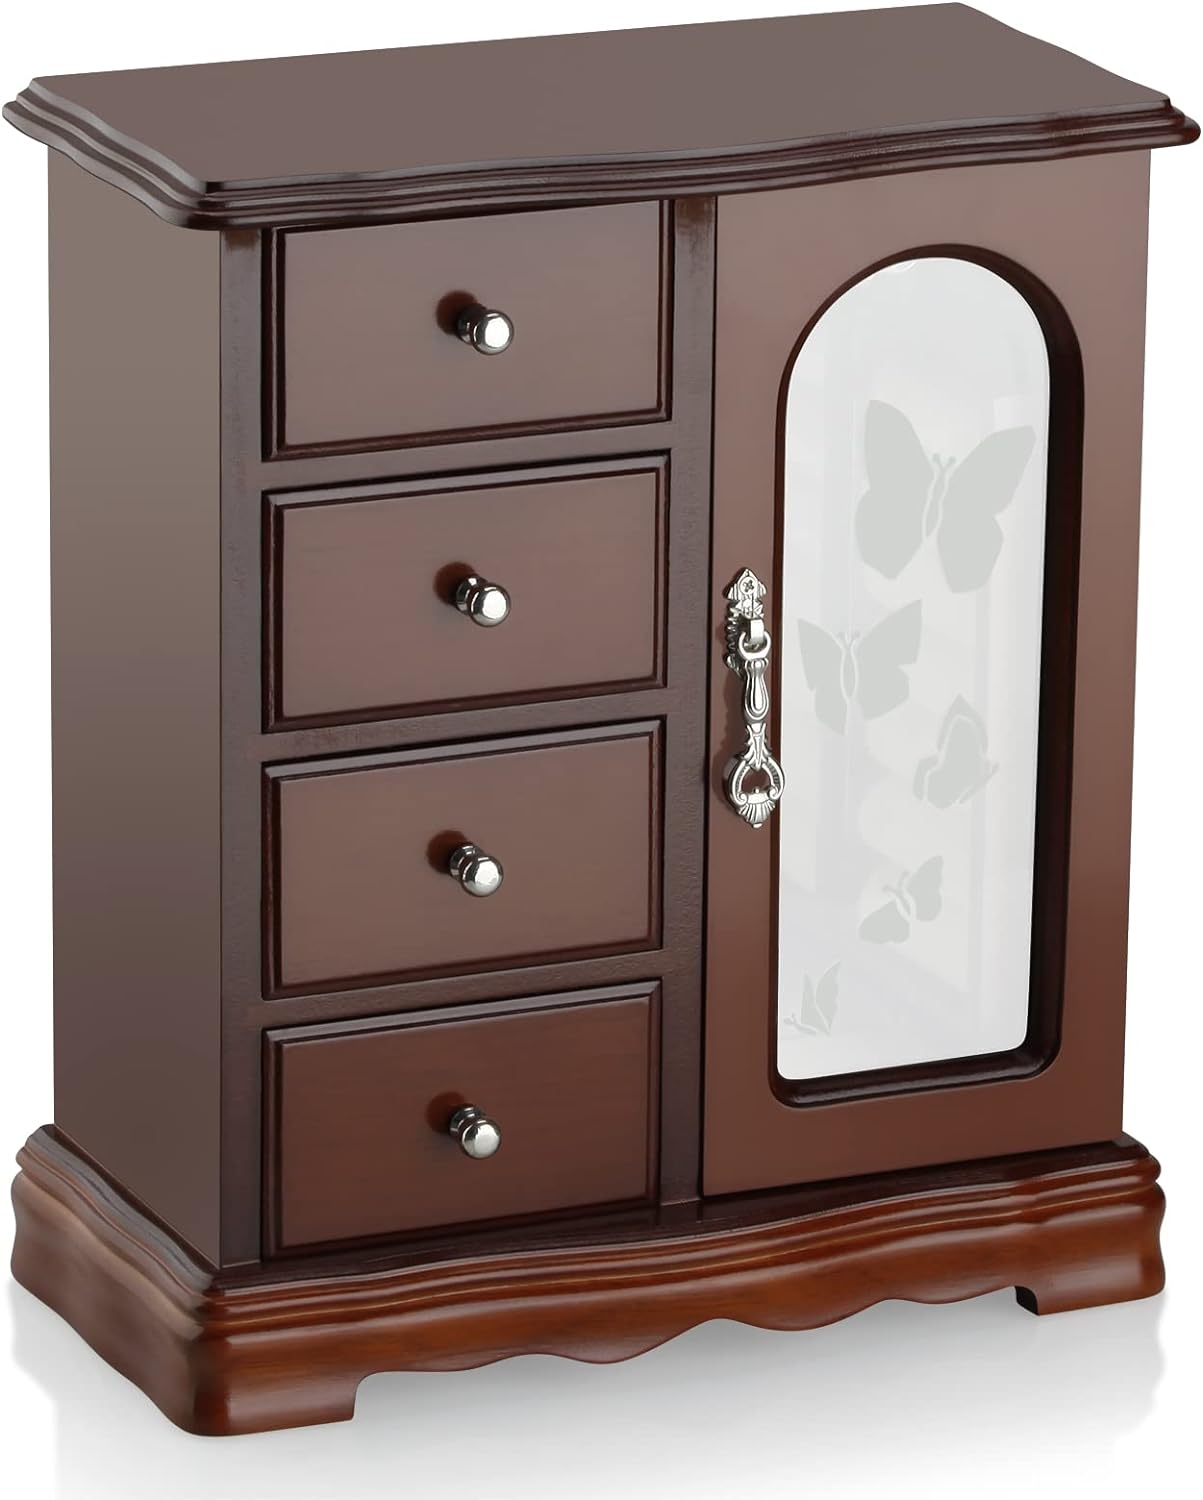 RR ROUND RICH DESIGN Jewelry Box - Made of Solid Wood with 4 Drawers Organizer and Built-in Necklace Carousel and Large Mirror Brown